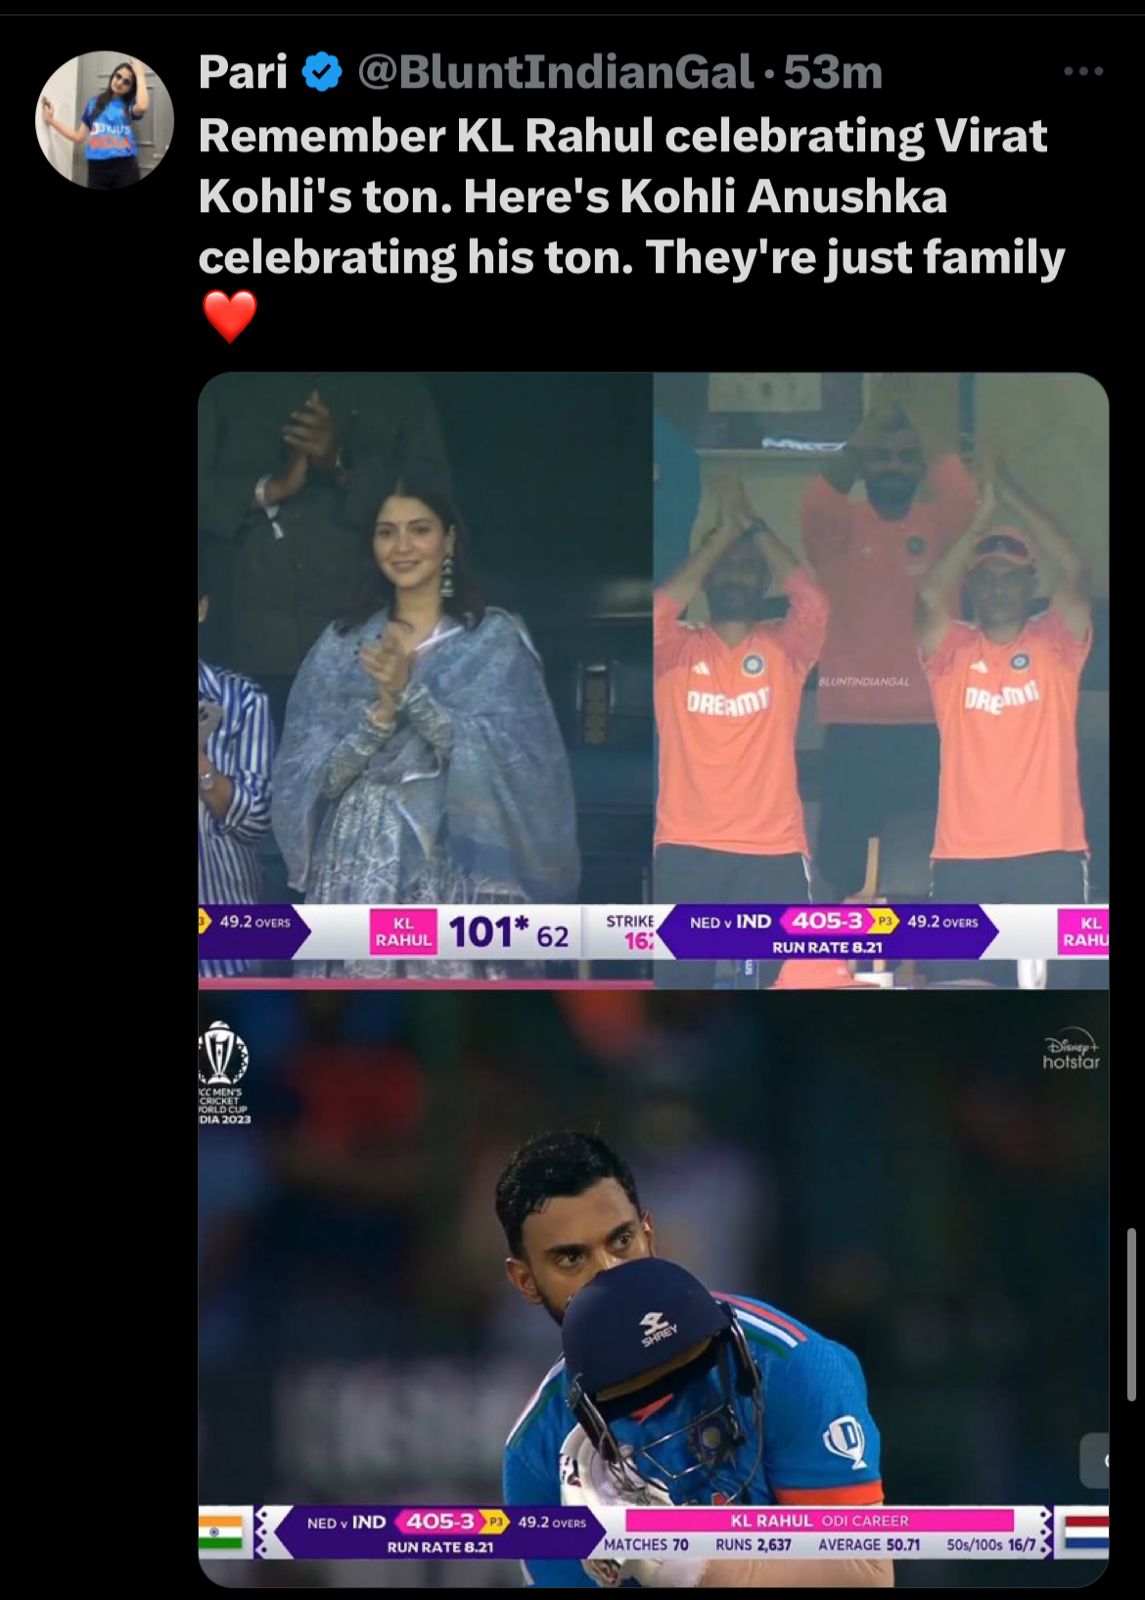 Memes Galore As KL Rahul Scores The Fastest Century By An Indian In World Cup